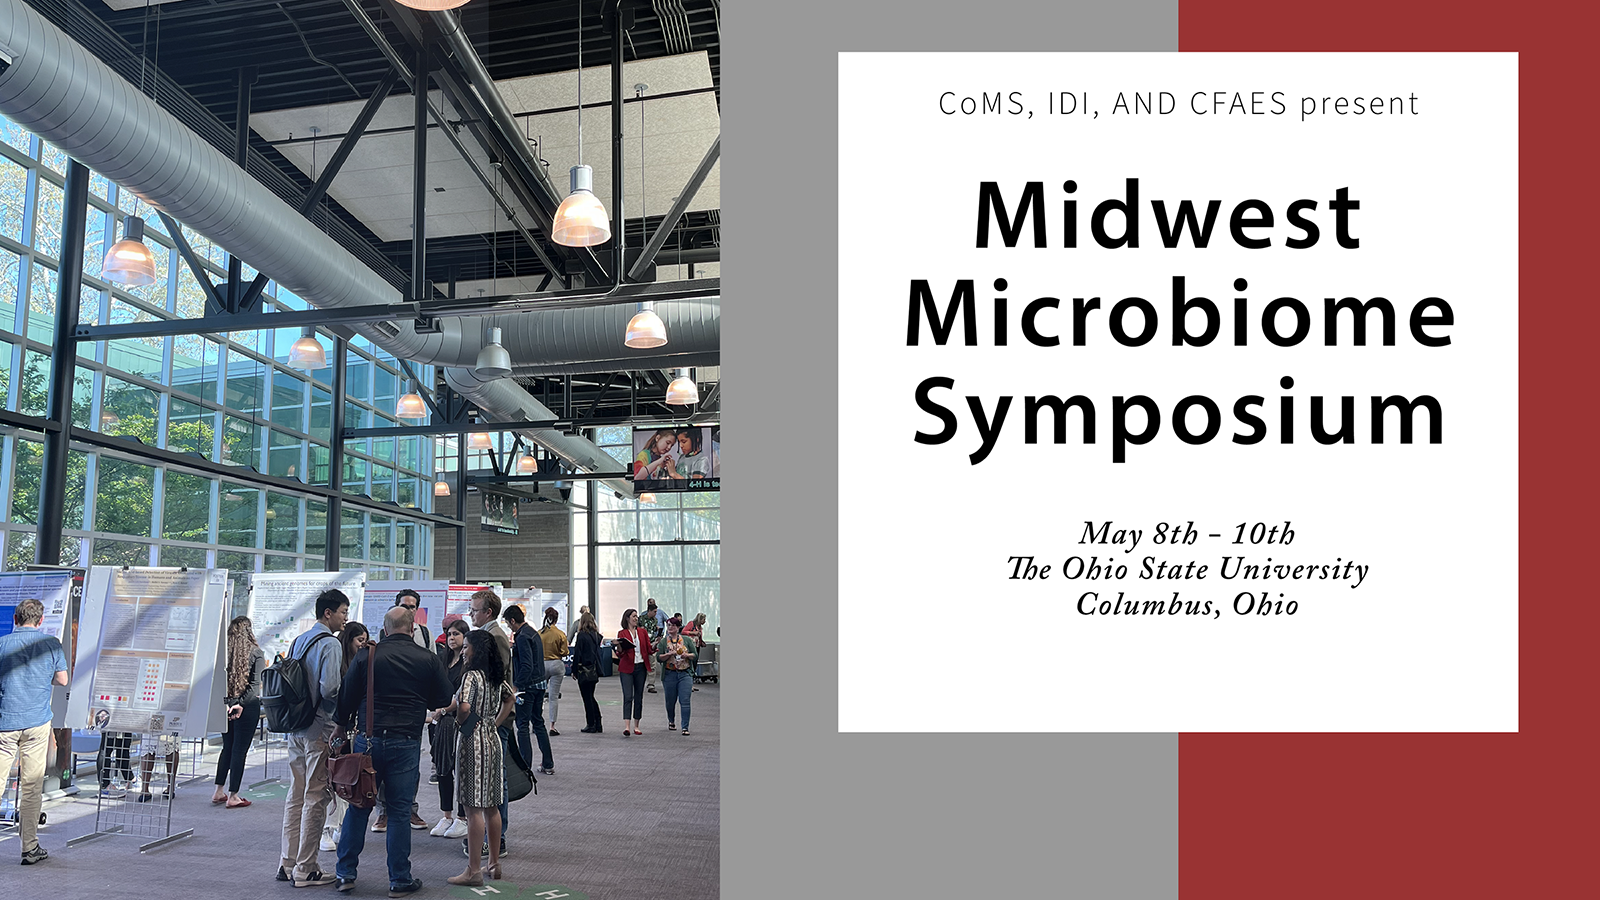 Midwest Microbiome Symposium